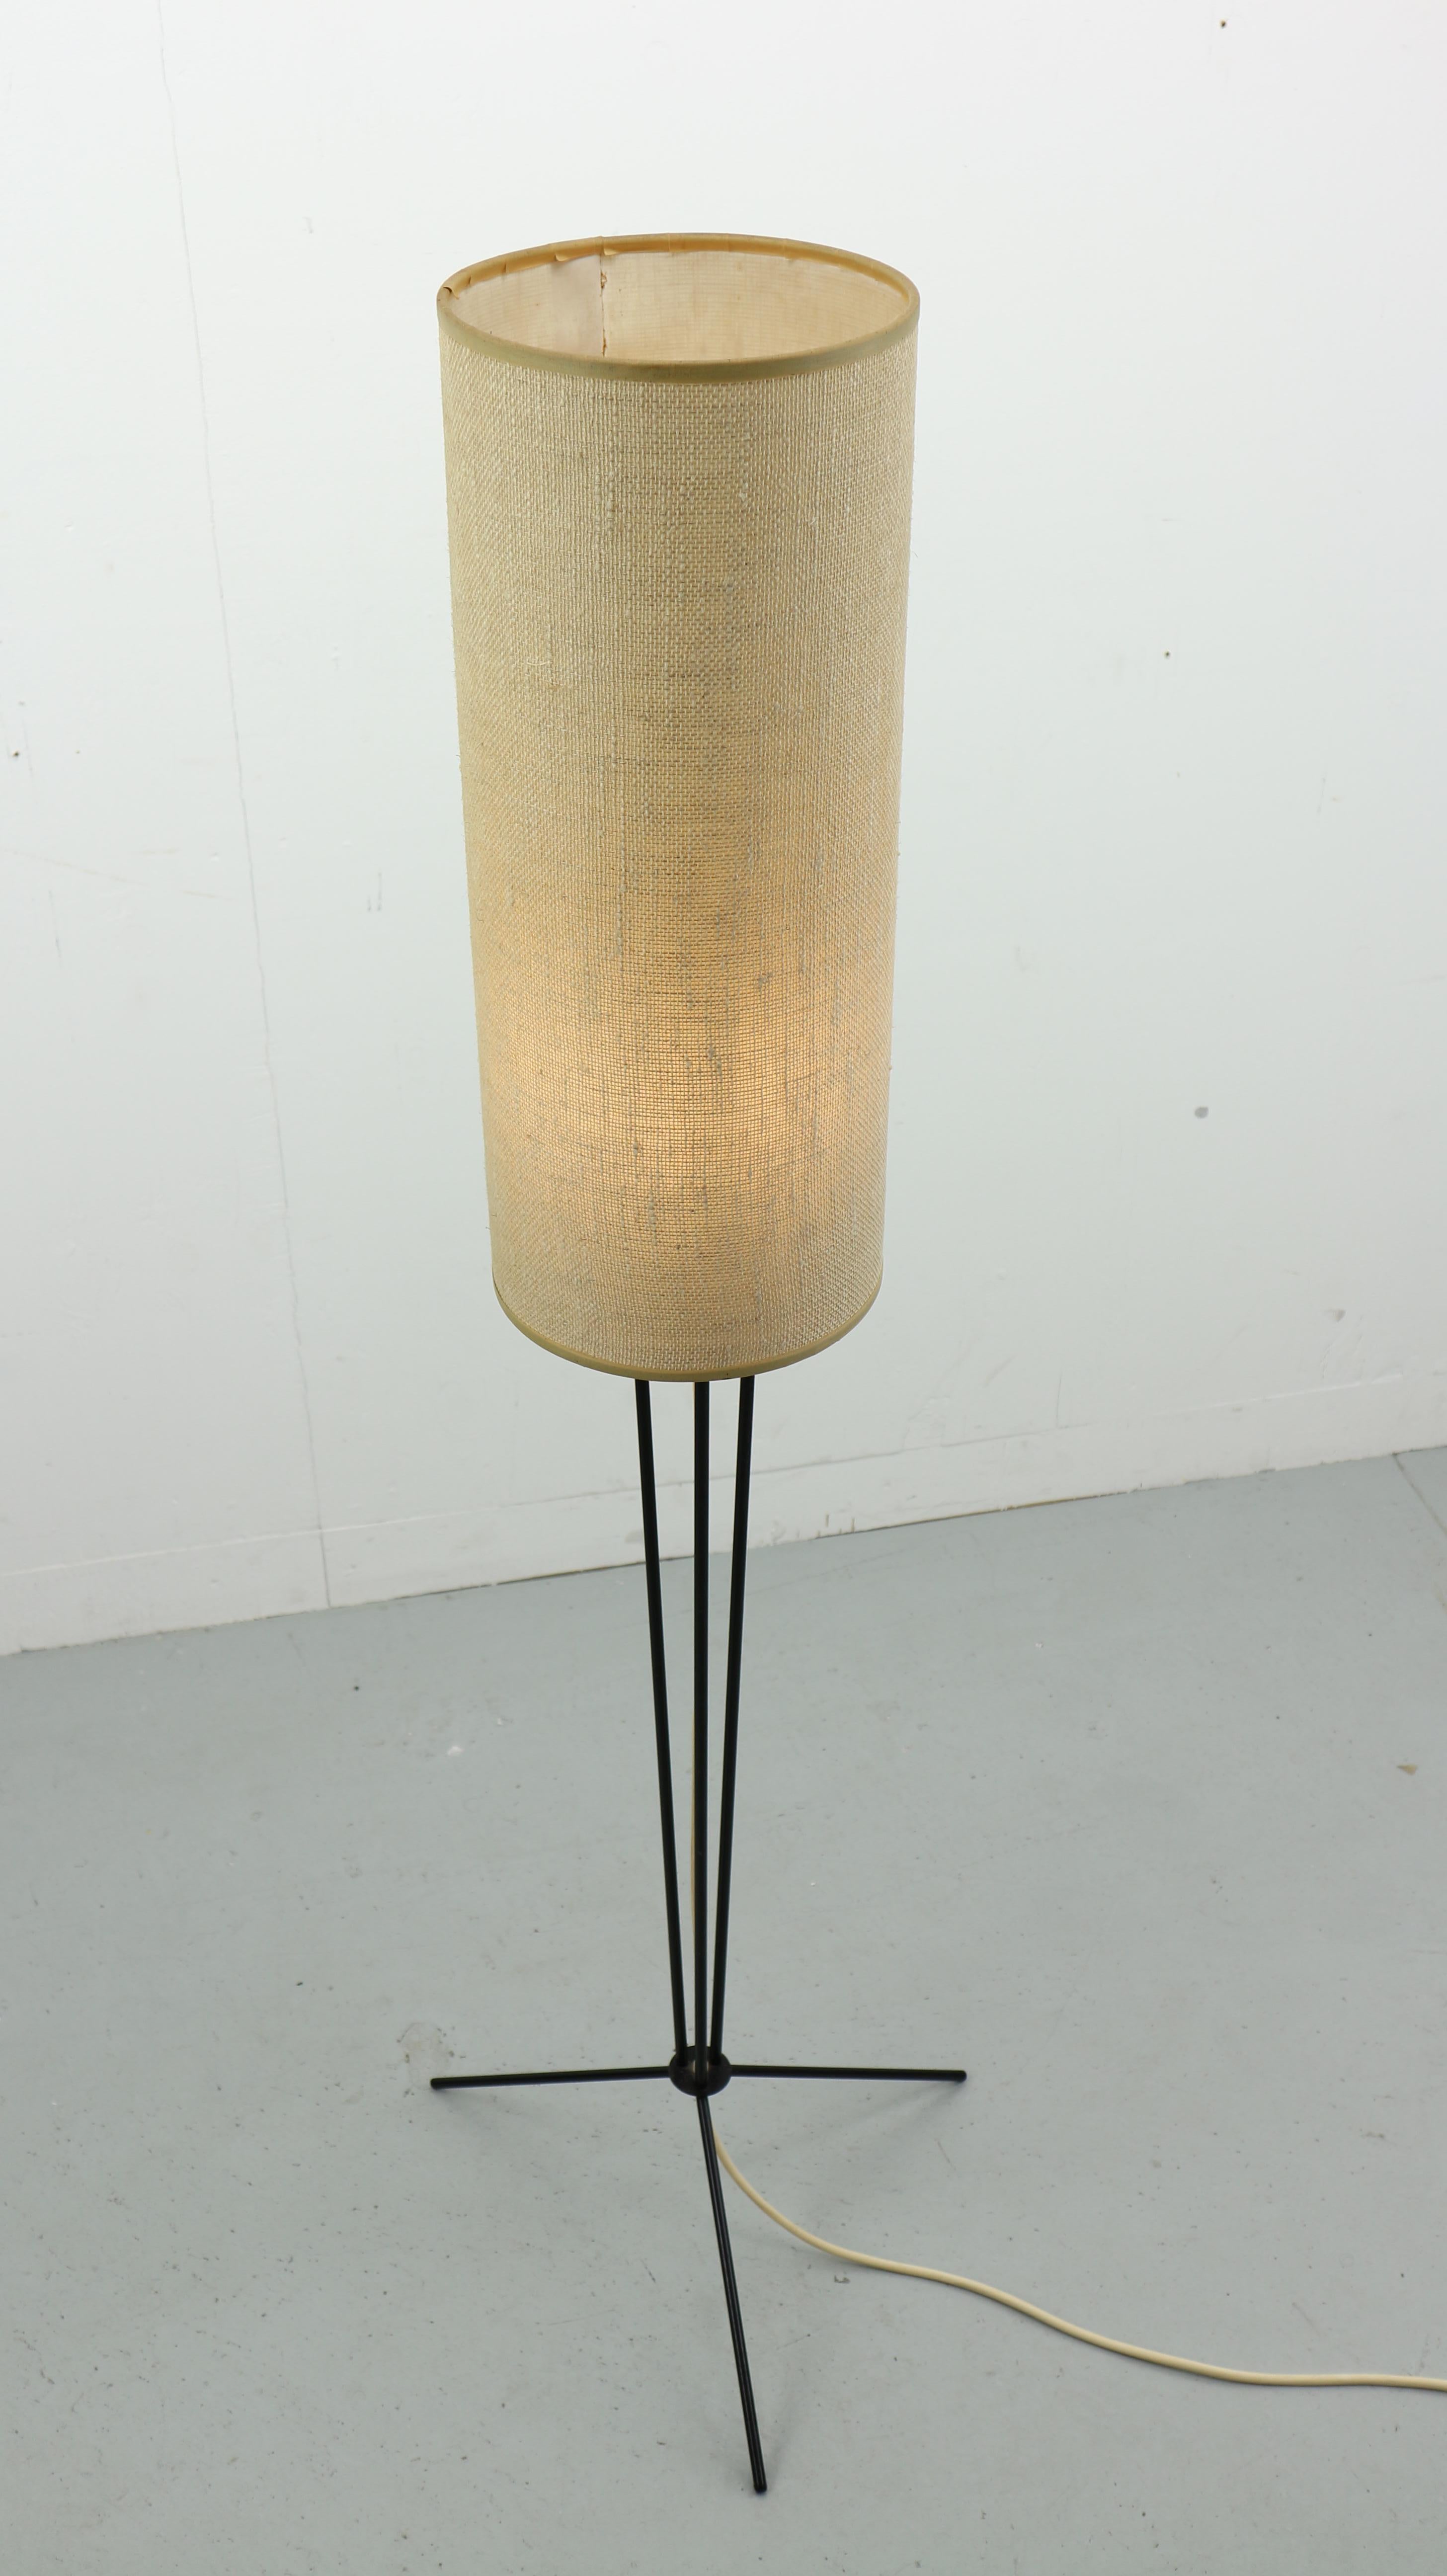 Vintage tripod floor lamp is made in 1950s.
The lamp stands on a three black metal feet and comes with an original sand color lampshade.
This minimalistic lamp is a beautiful interior accent to your design home.
 